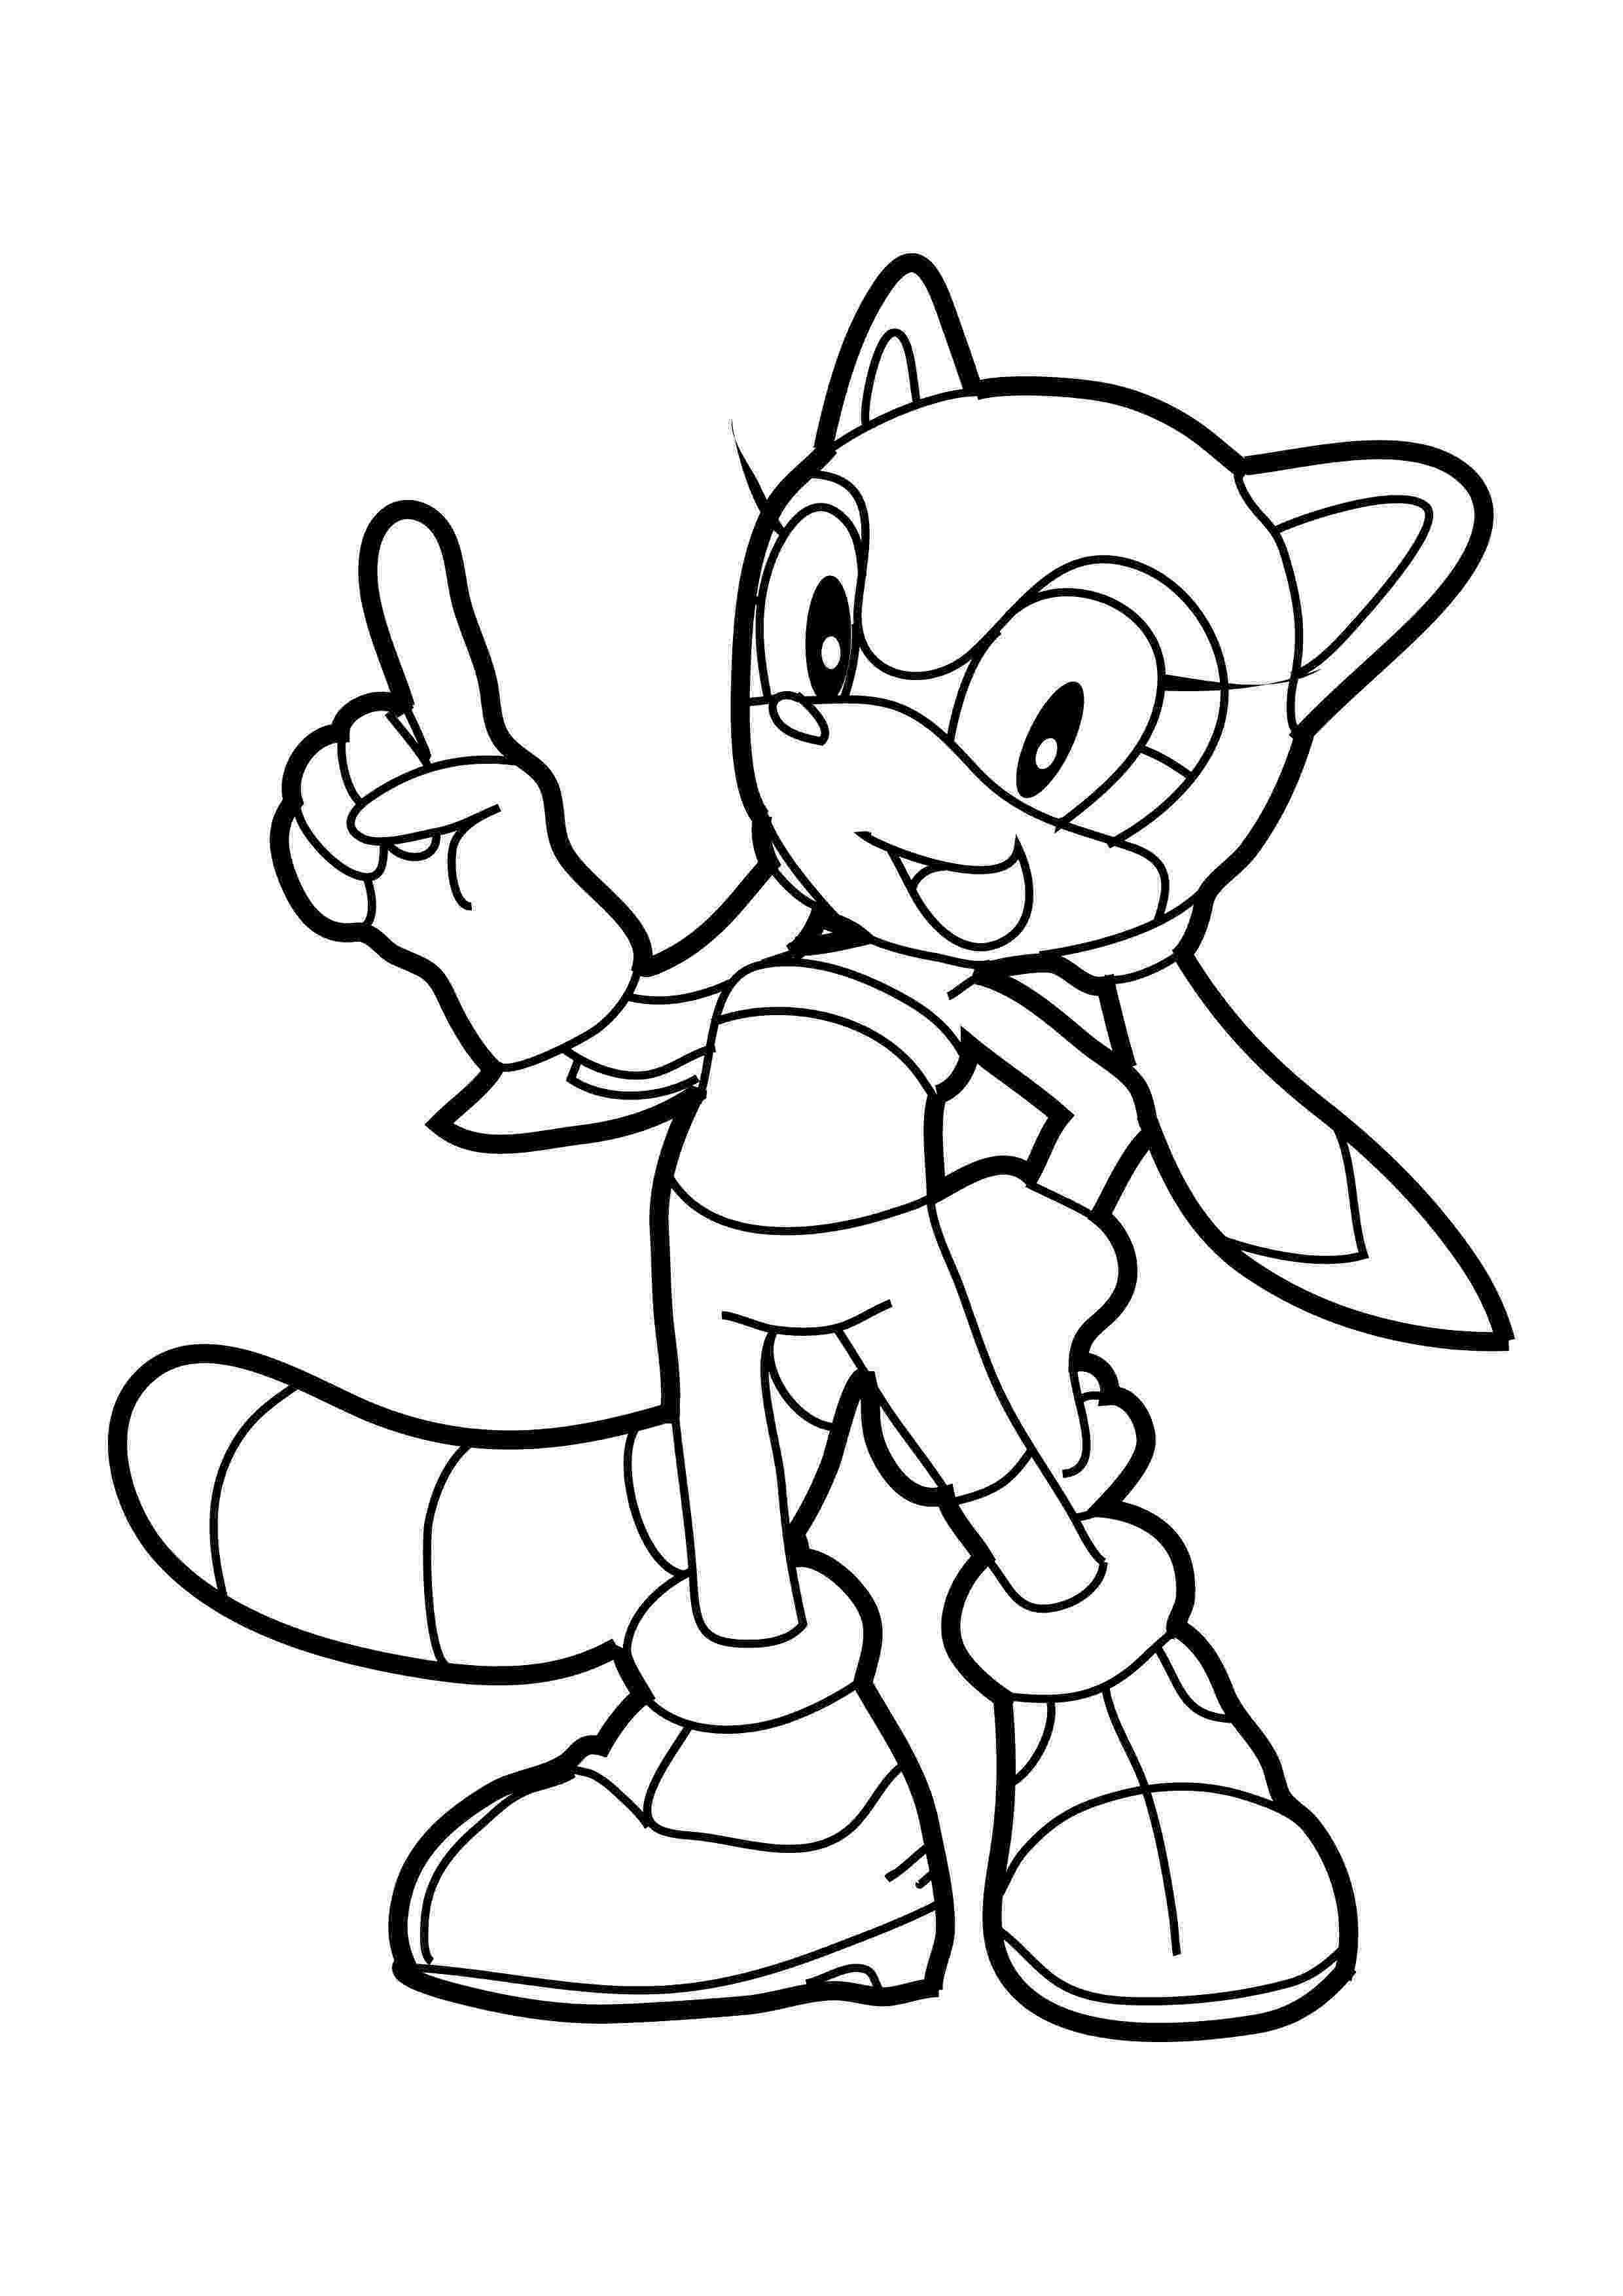 sonic the hedgehog colouring pictures printable sonic coloring pages for kids cool2bkids hedgehog pictures sonic the colouring 